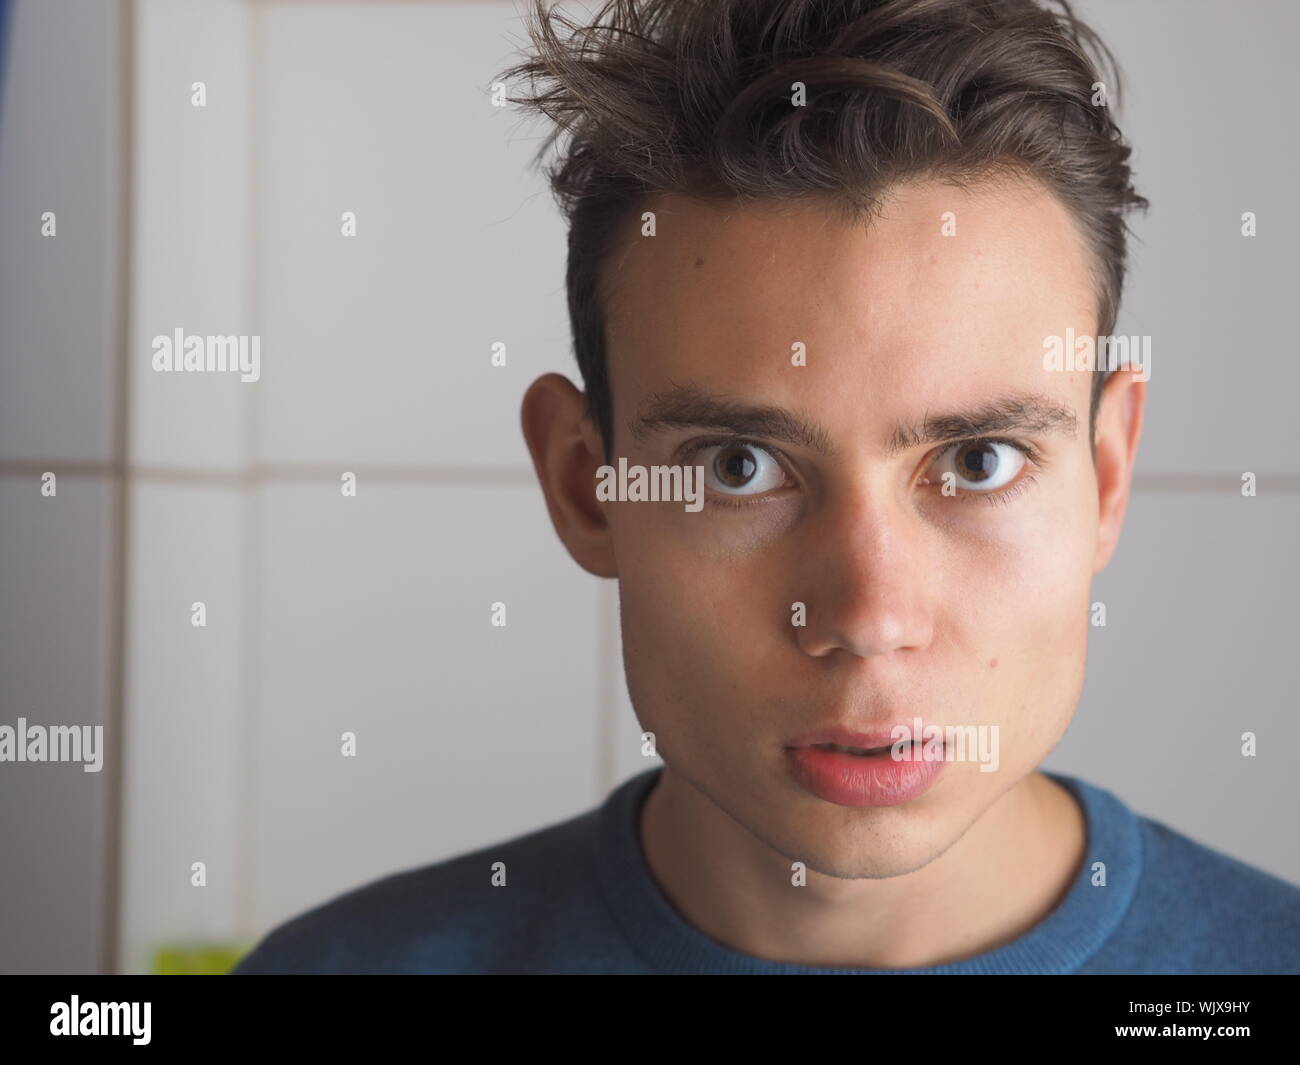 Close-up Portrait Of Shocked Young Man At Home Stock Photo